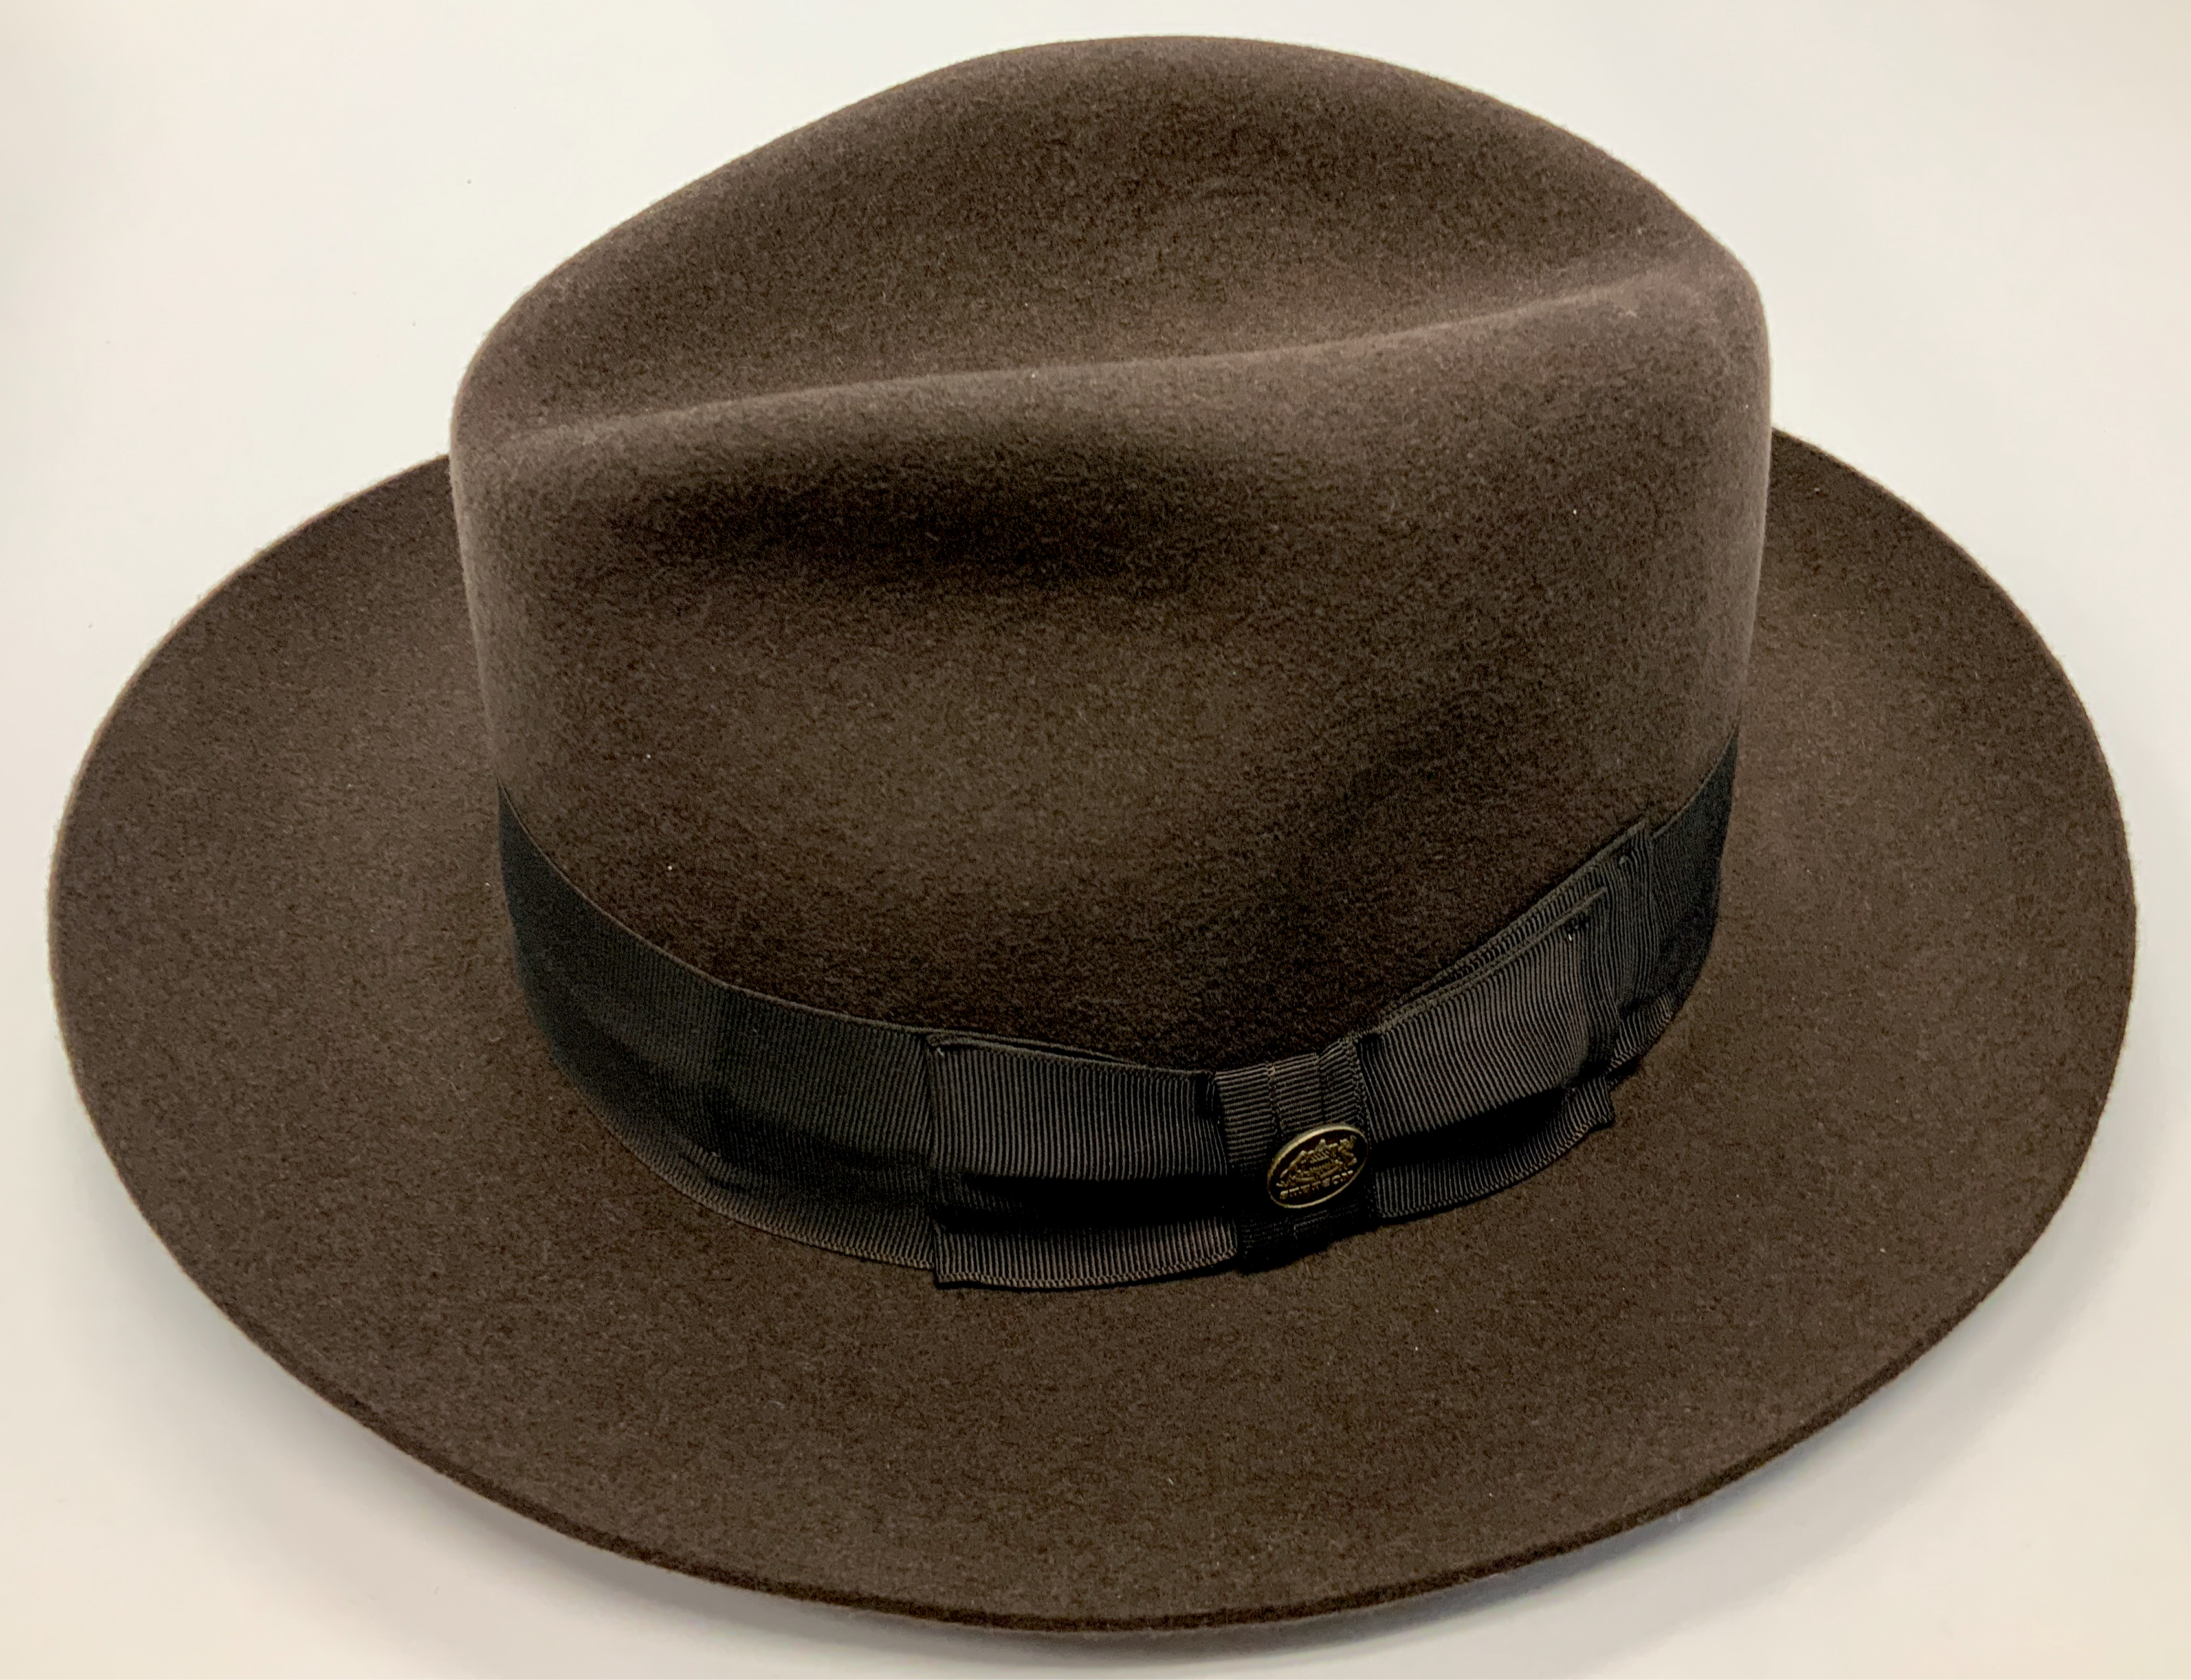 stetson temple wool hat in mink at lil johns big and tall